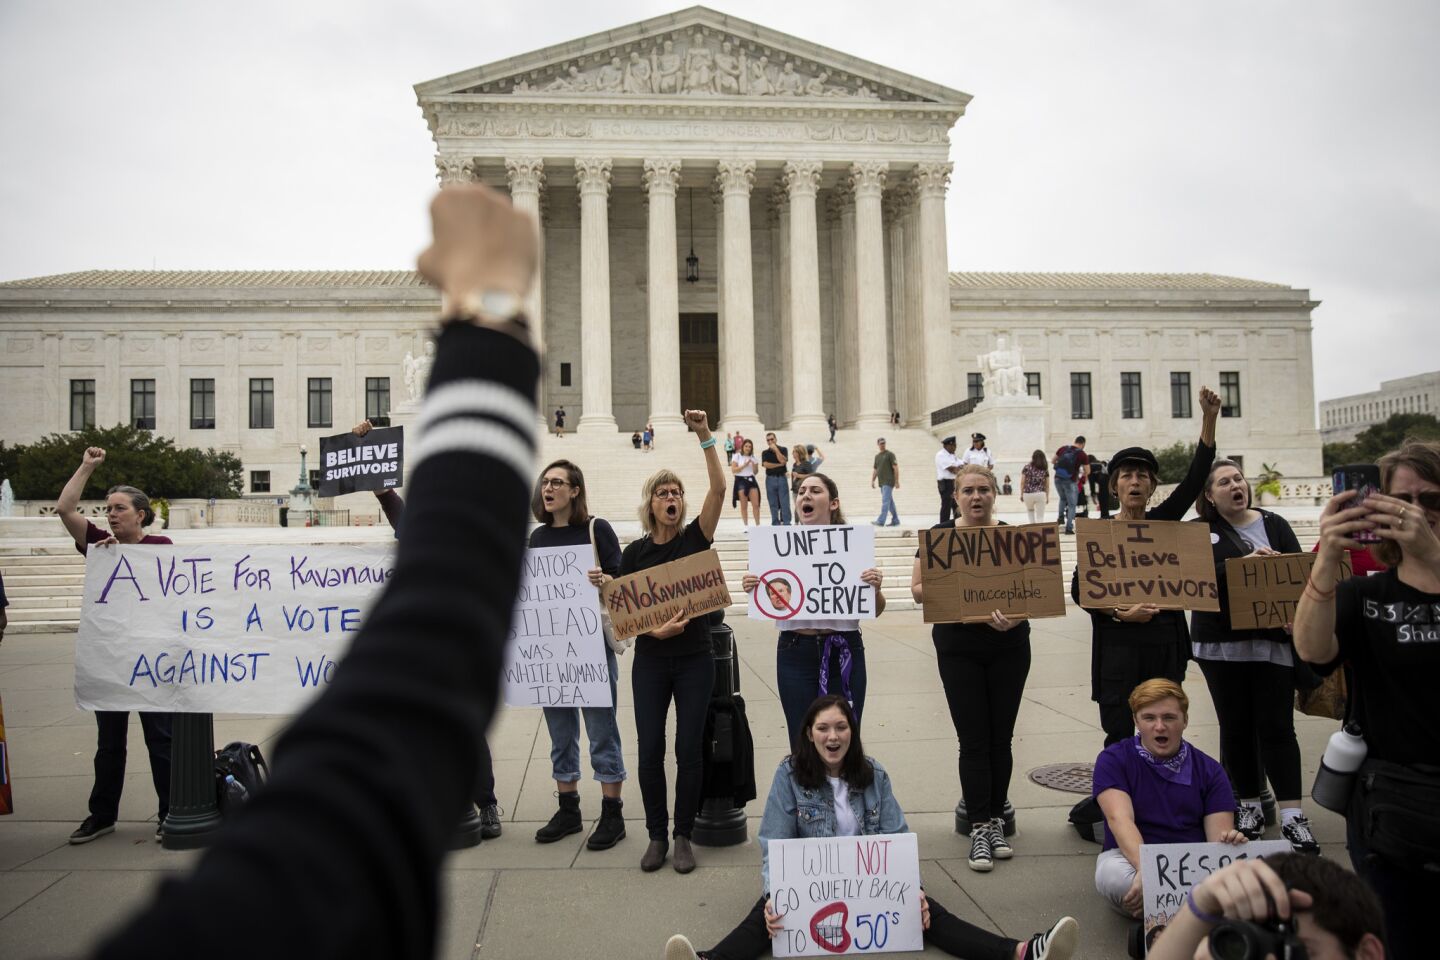 Anti-Kavanaugh protesters rally outside the Supreme Court on Saturday.